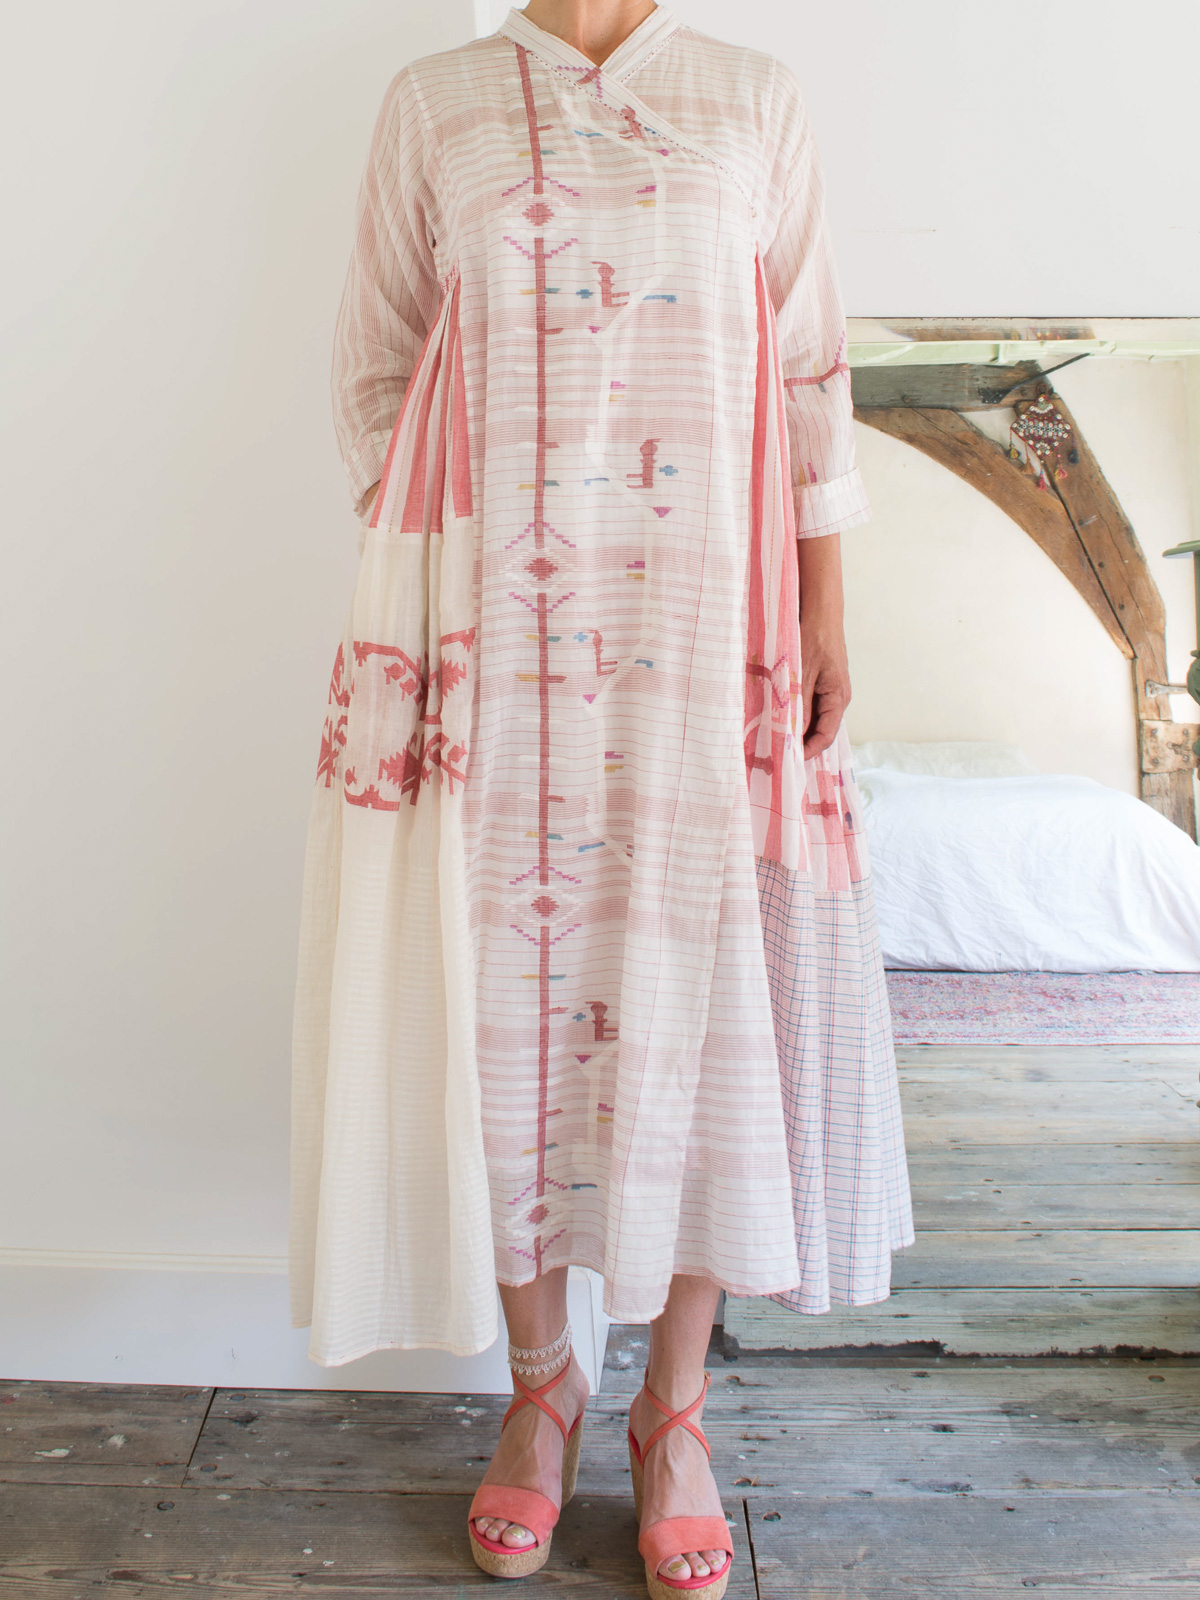 wrap dress in white and off-white cotton - dresses and blouses - completely  handmade - apparel - Ottomania.nl | Official Ottomania Site